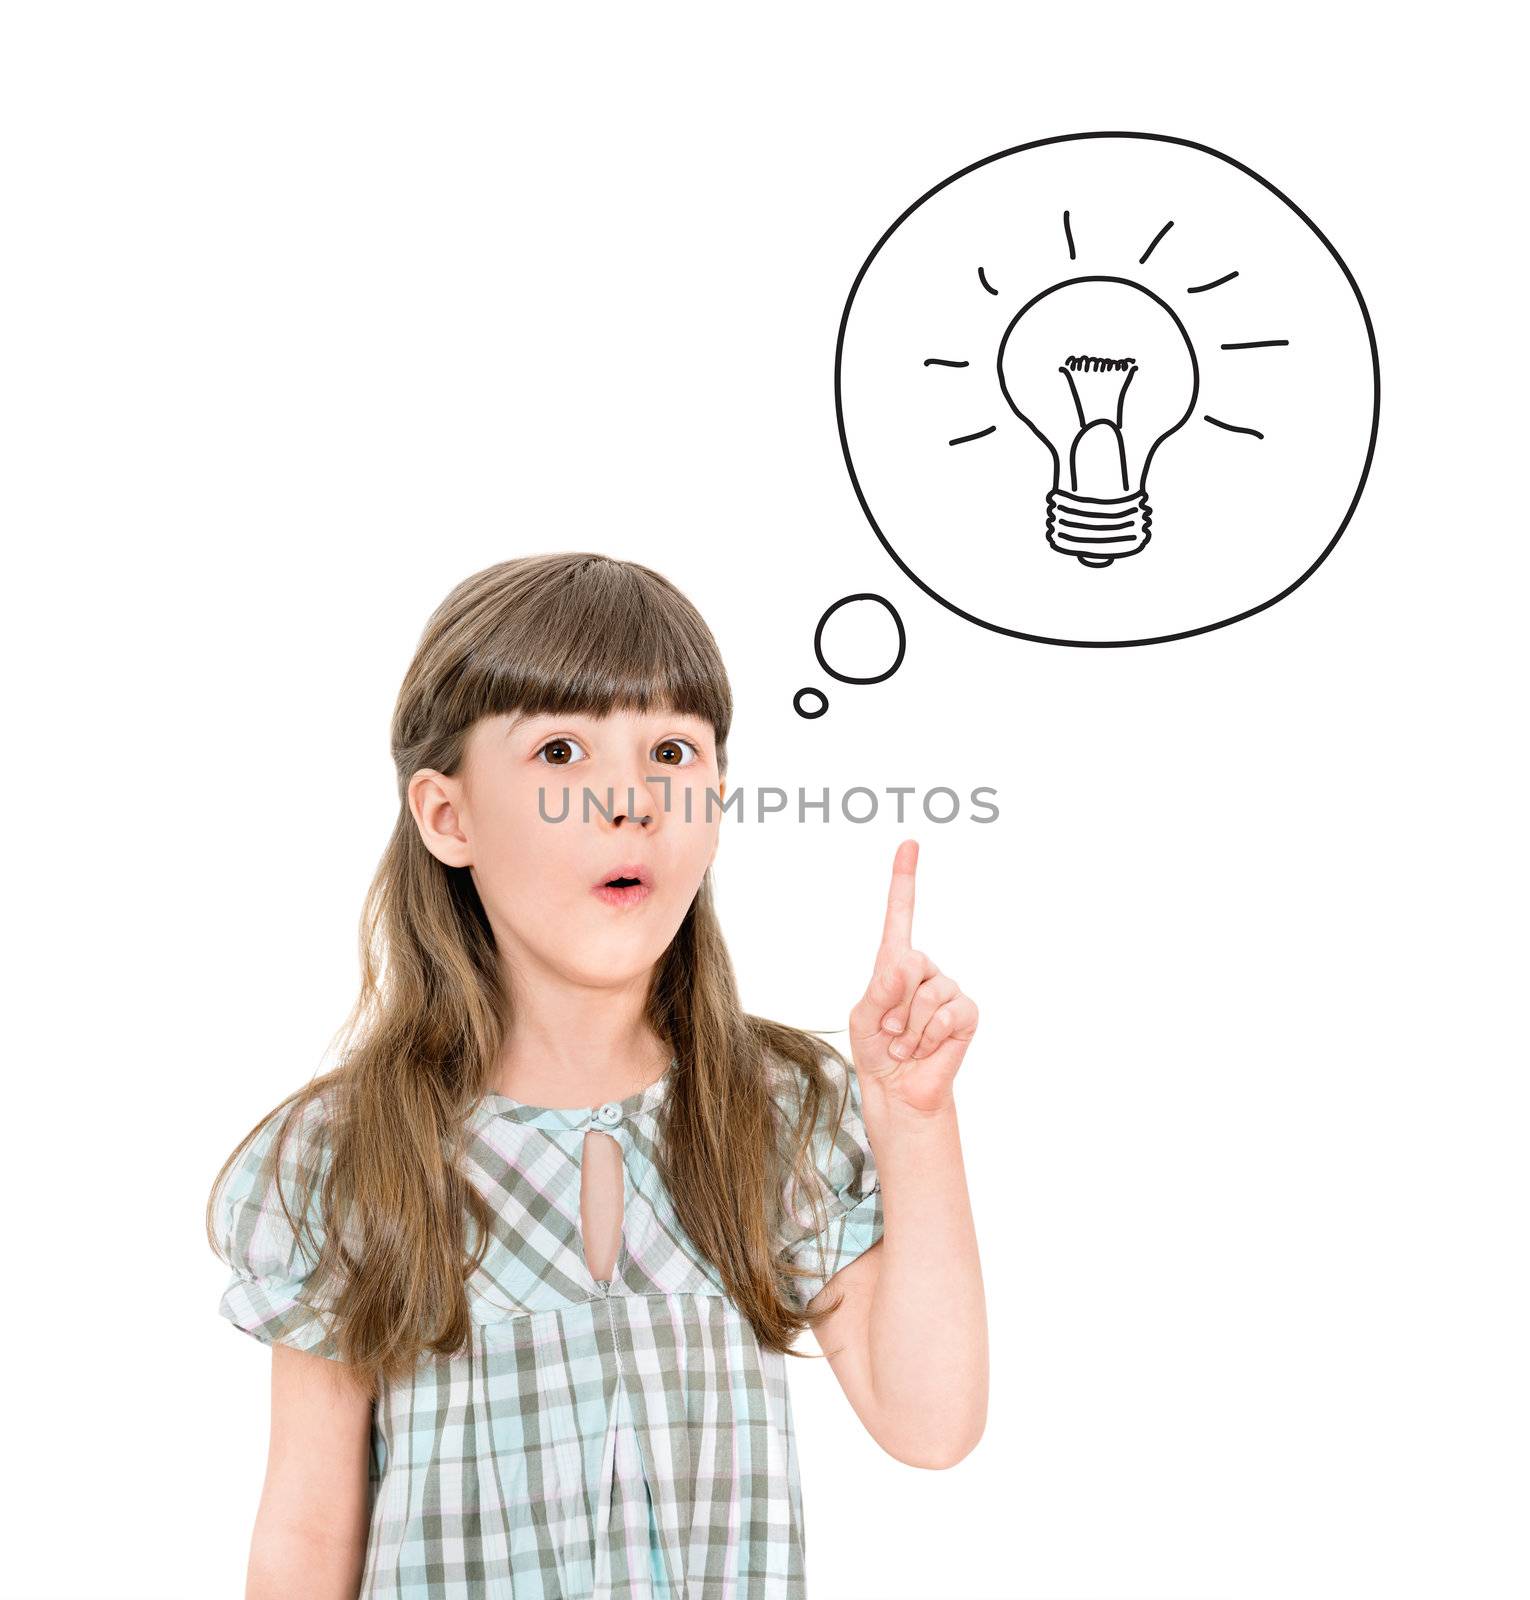 Clever little girl with a bright idea symbol pointing upwards with her finger to gain attention. Isolated on white.